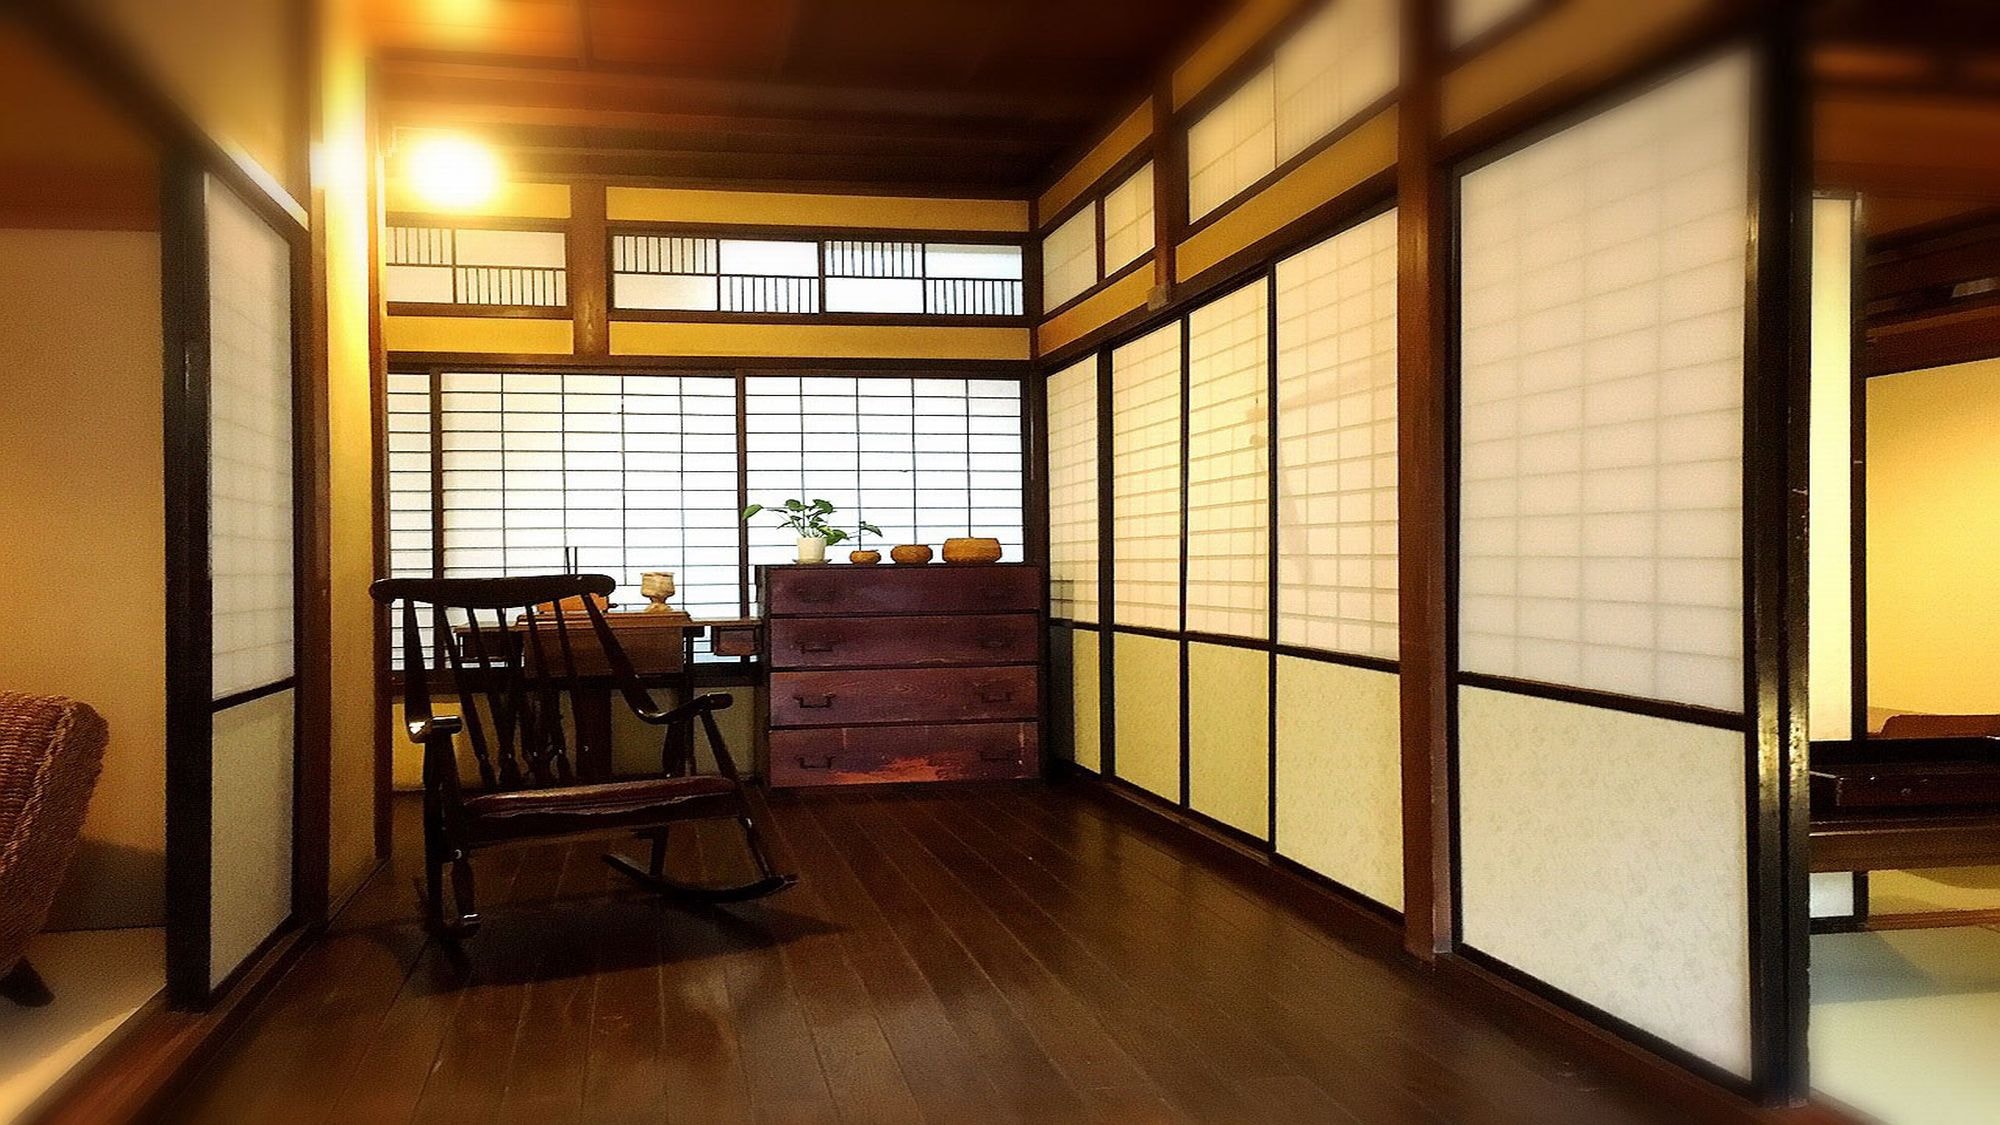 [Main building Hanare] There is a corridor between the Japanese-style room and the living room, which are two consecutive rooms.